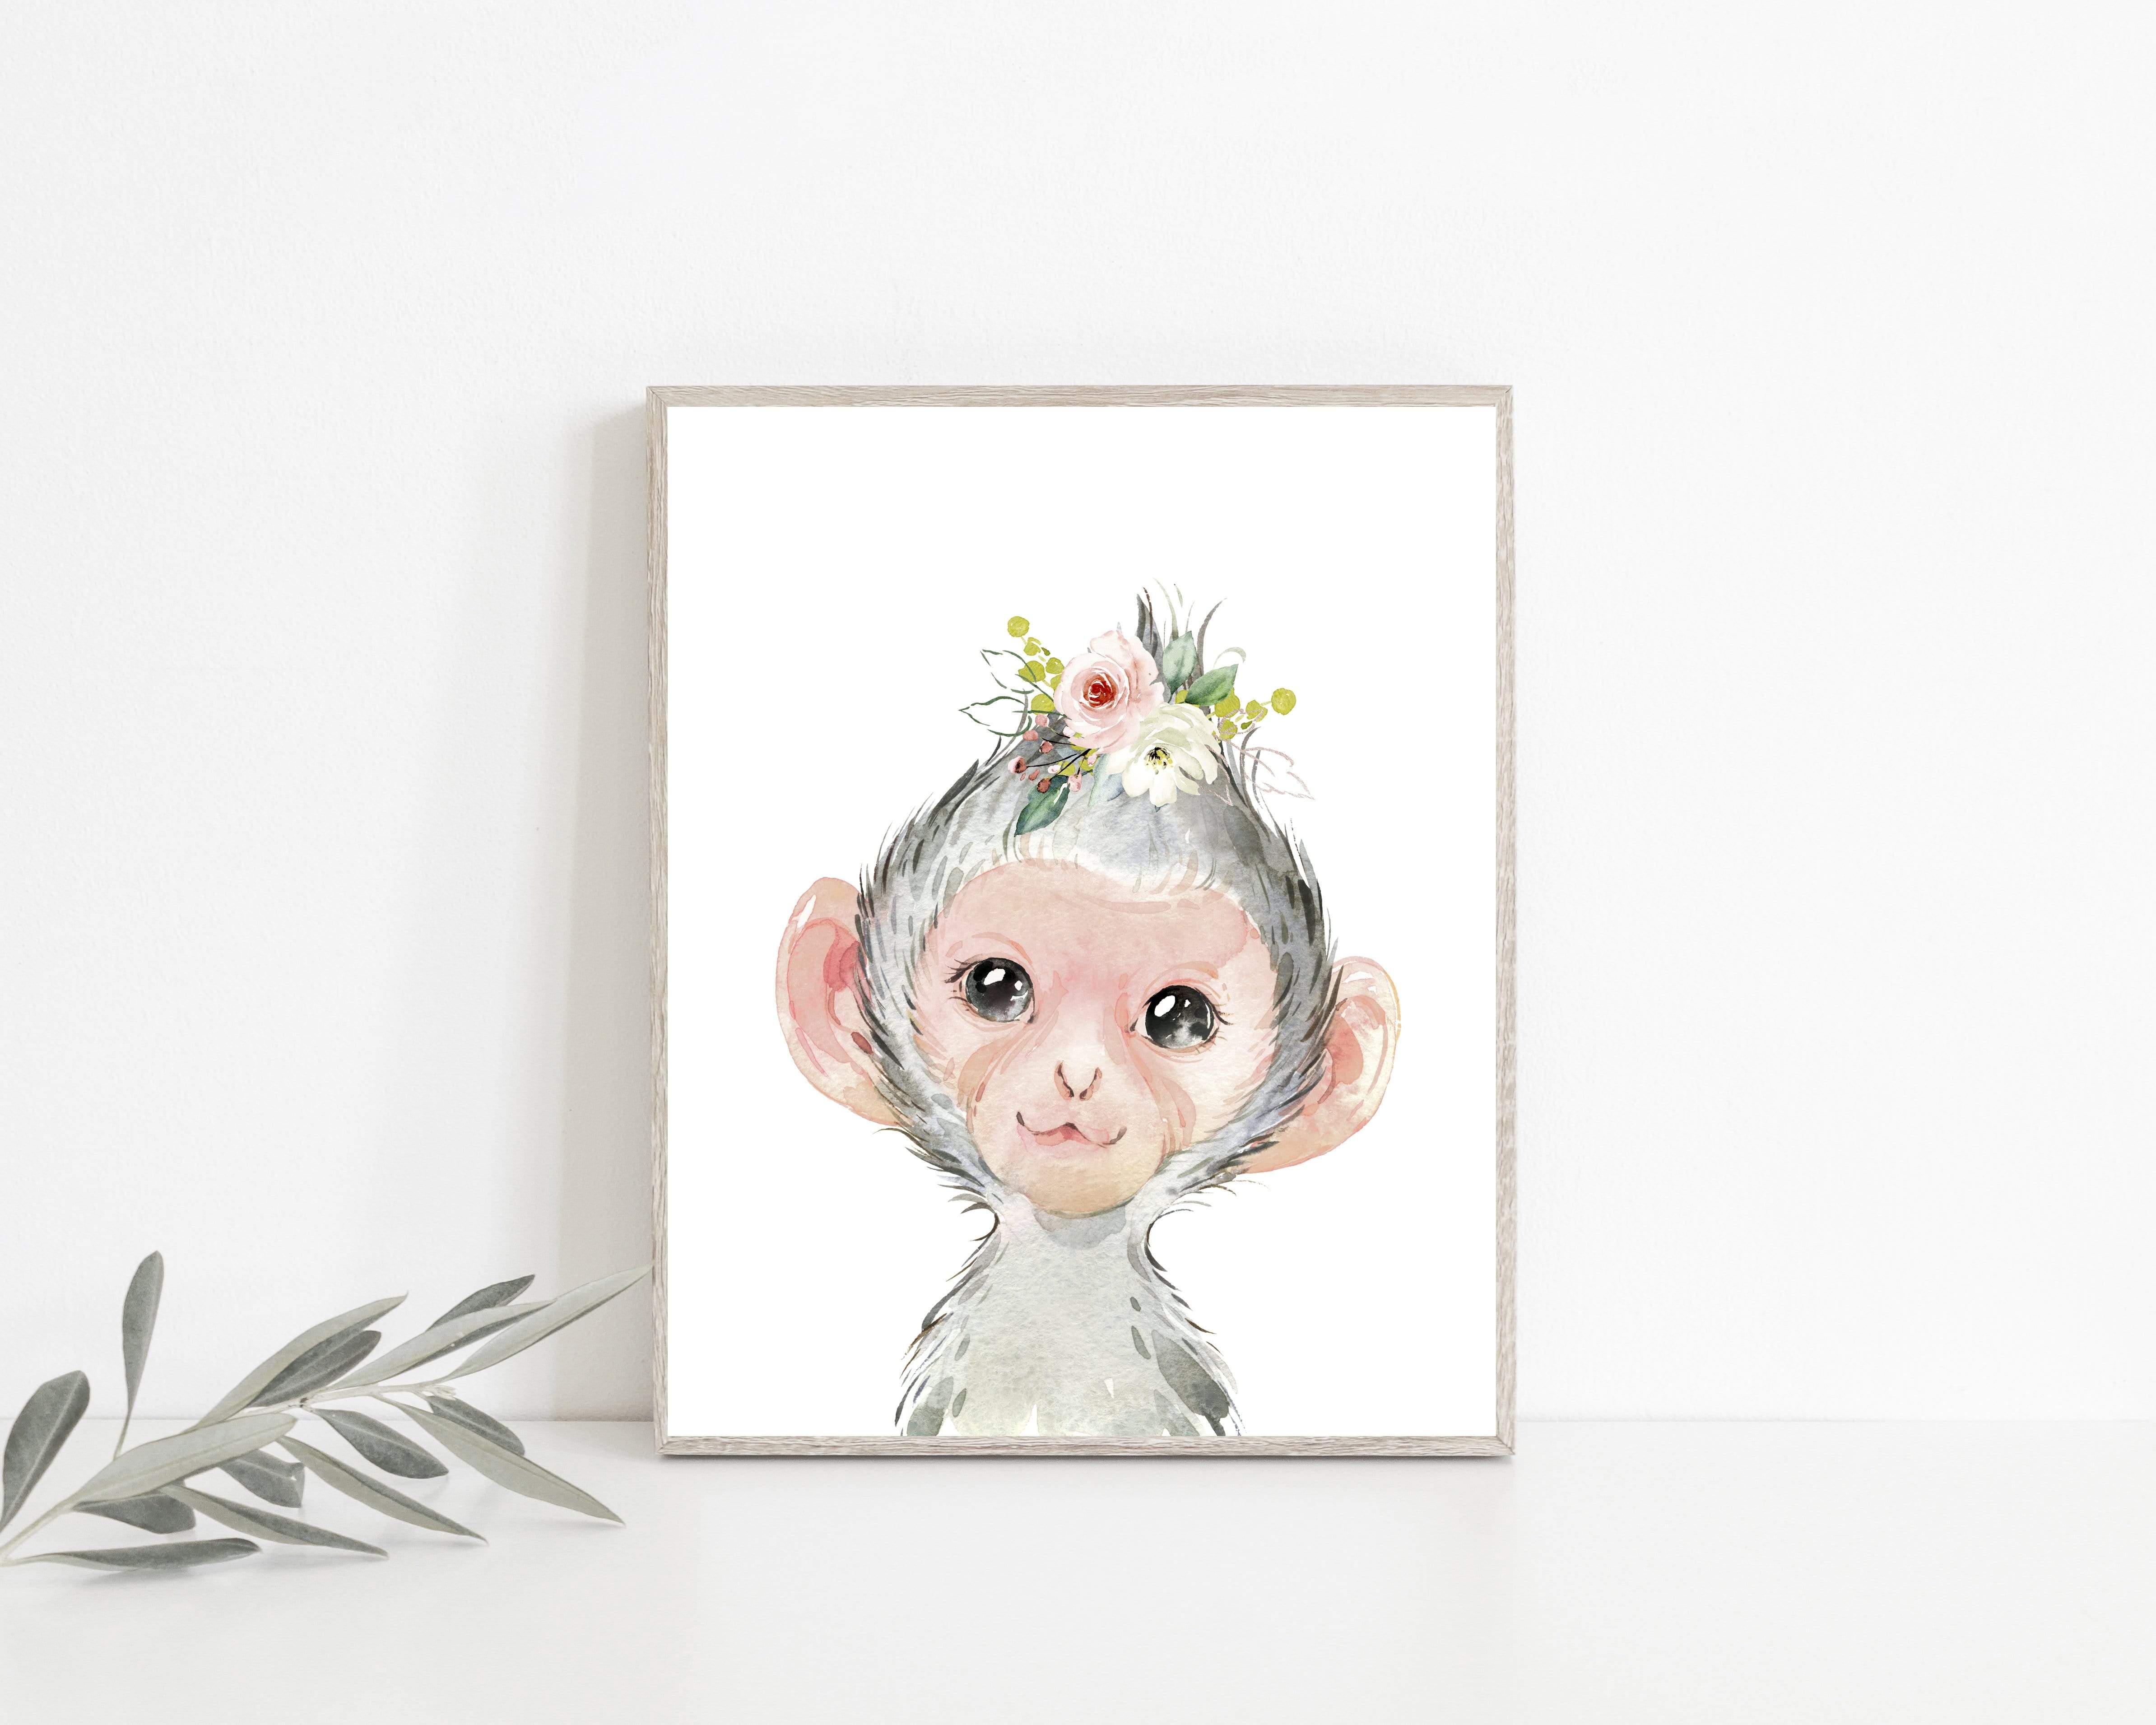 Baby Monkey with flower crown print | Baby girl nursery art print nursery art print baby nursery bedroom decor